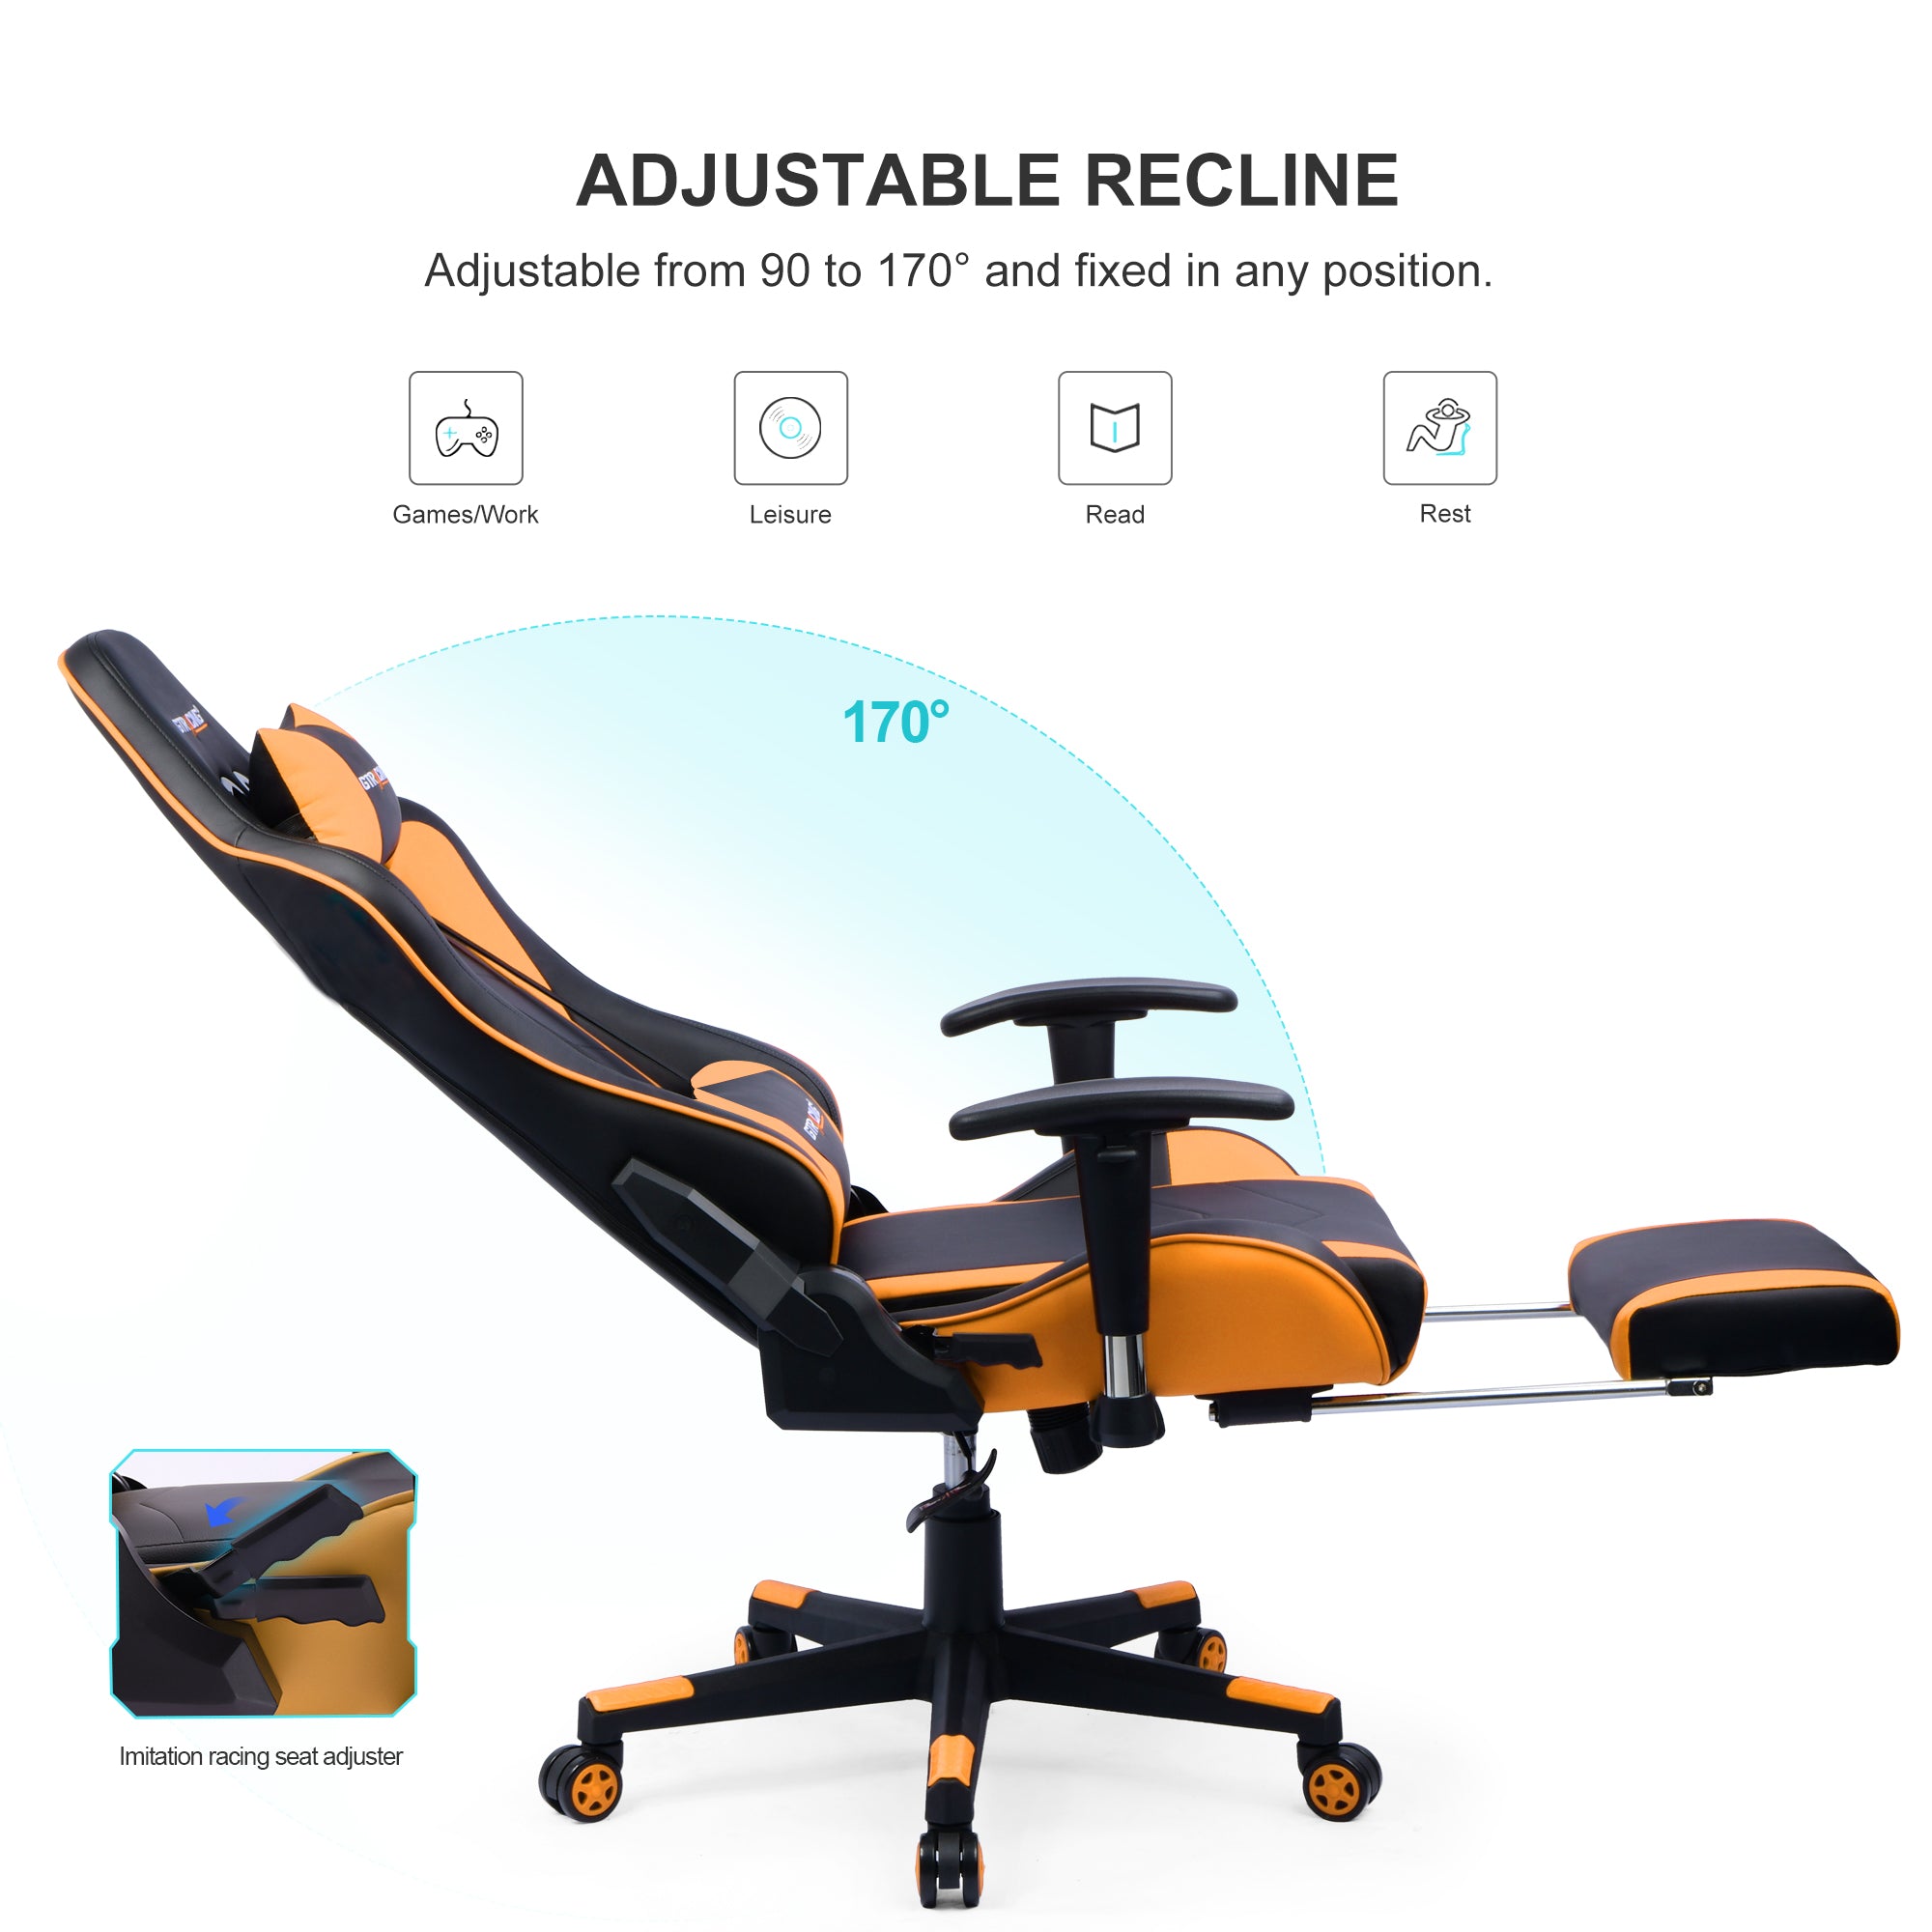 GTRACING Gaming Chair Office Chair PU Leather with Footrest&Adjustable Headrest - GTRACING